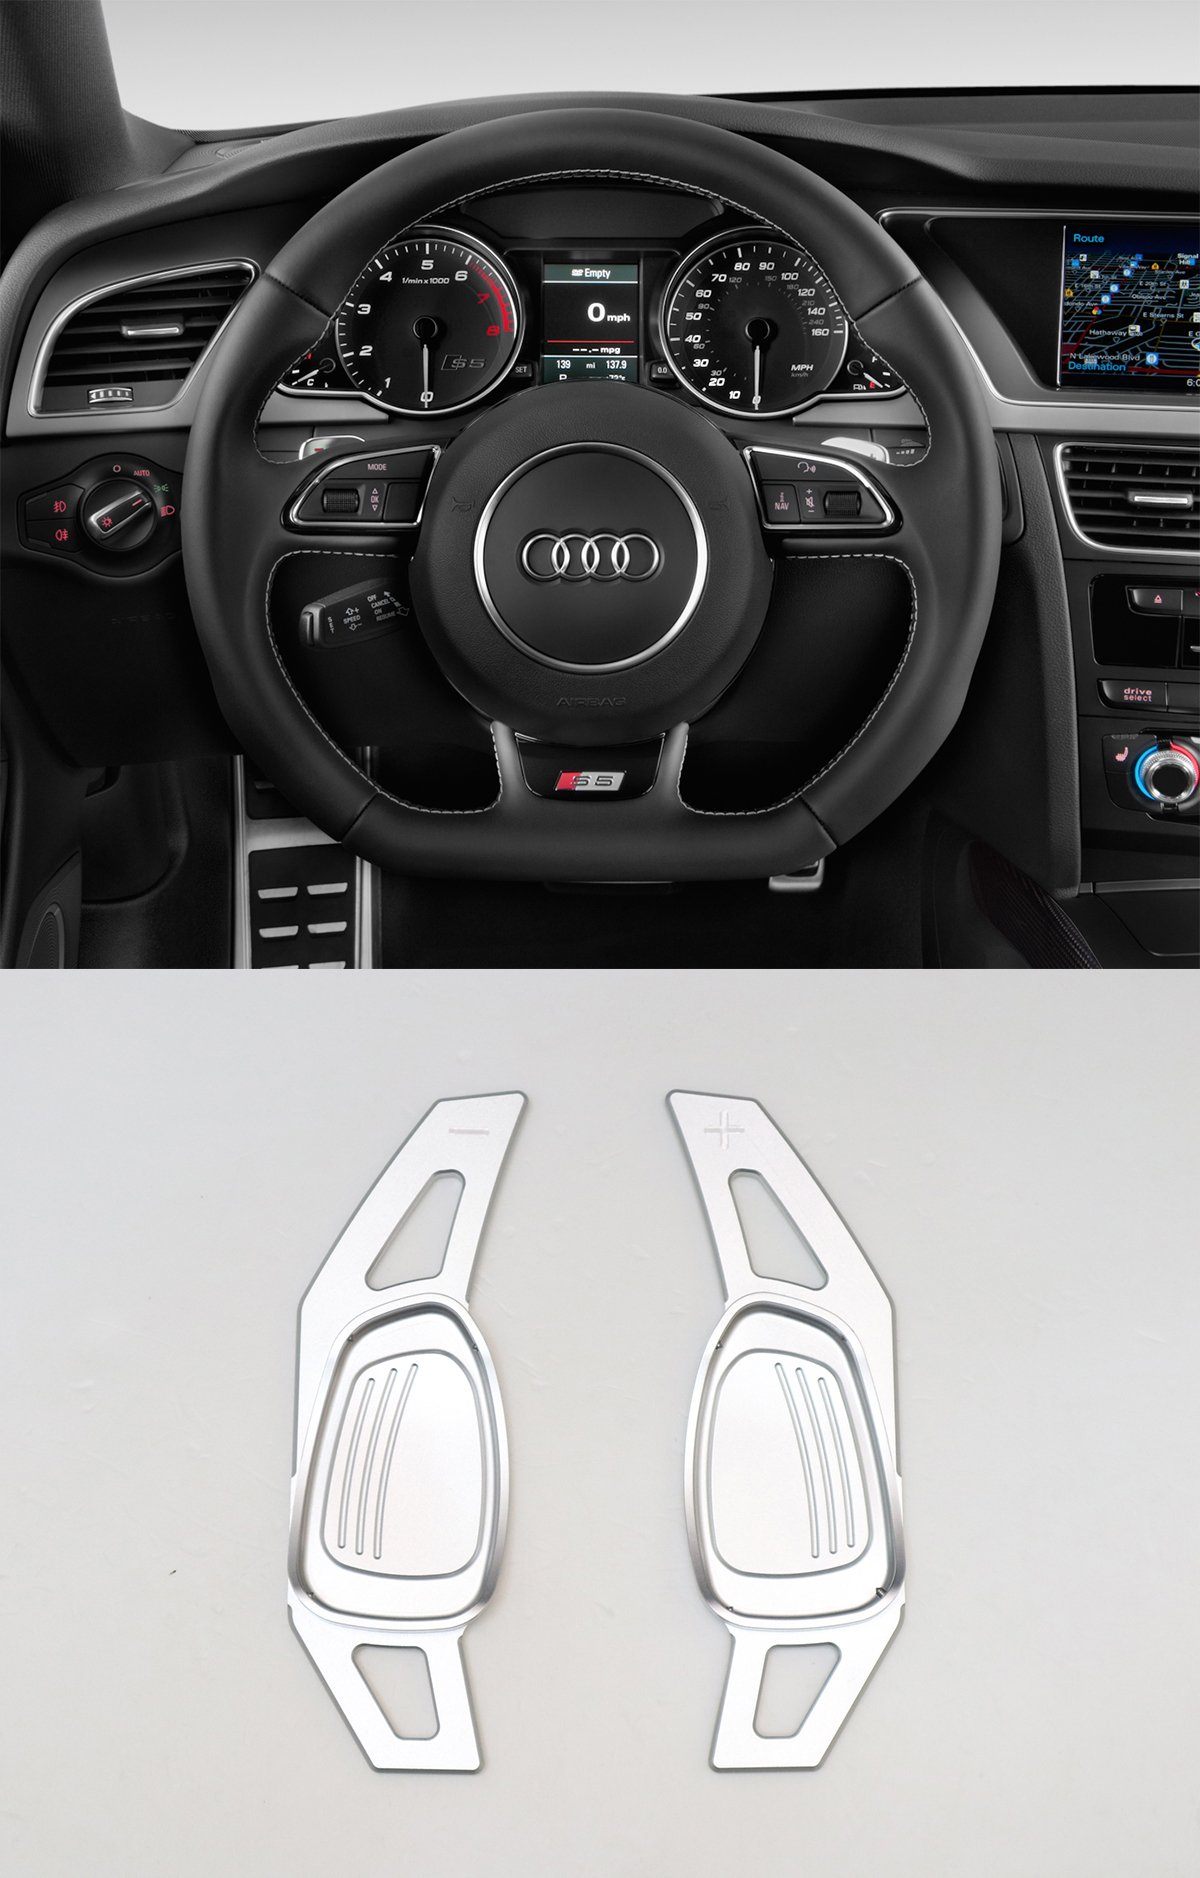 Pinalloy Silver Metal Alloy Steering Paddle Shifter Extension for Audi A5 S3 S5 S6 SQ5 RS3 RS6 RS7 2014-17 - Pinalloy Online Auto Accessories Lightweight Car Kit 